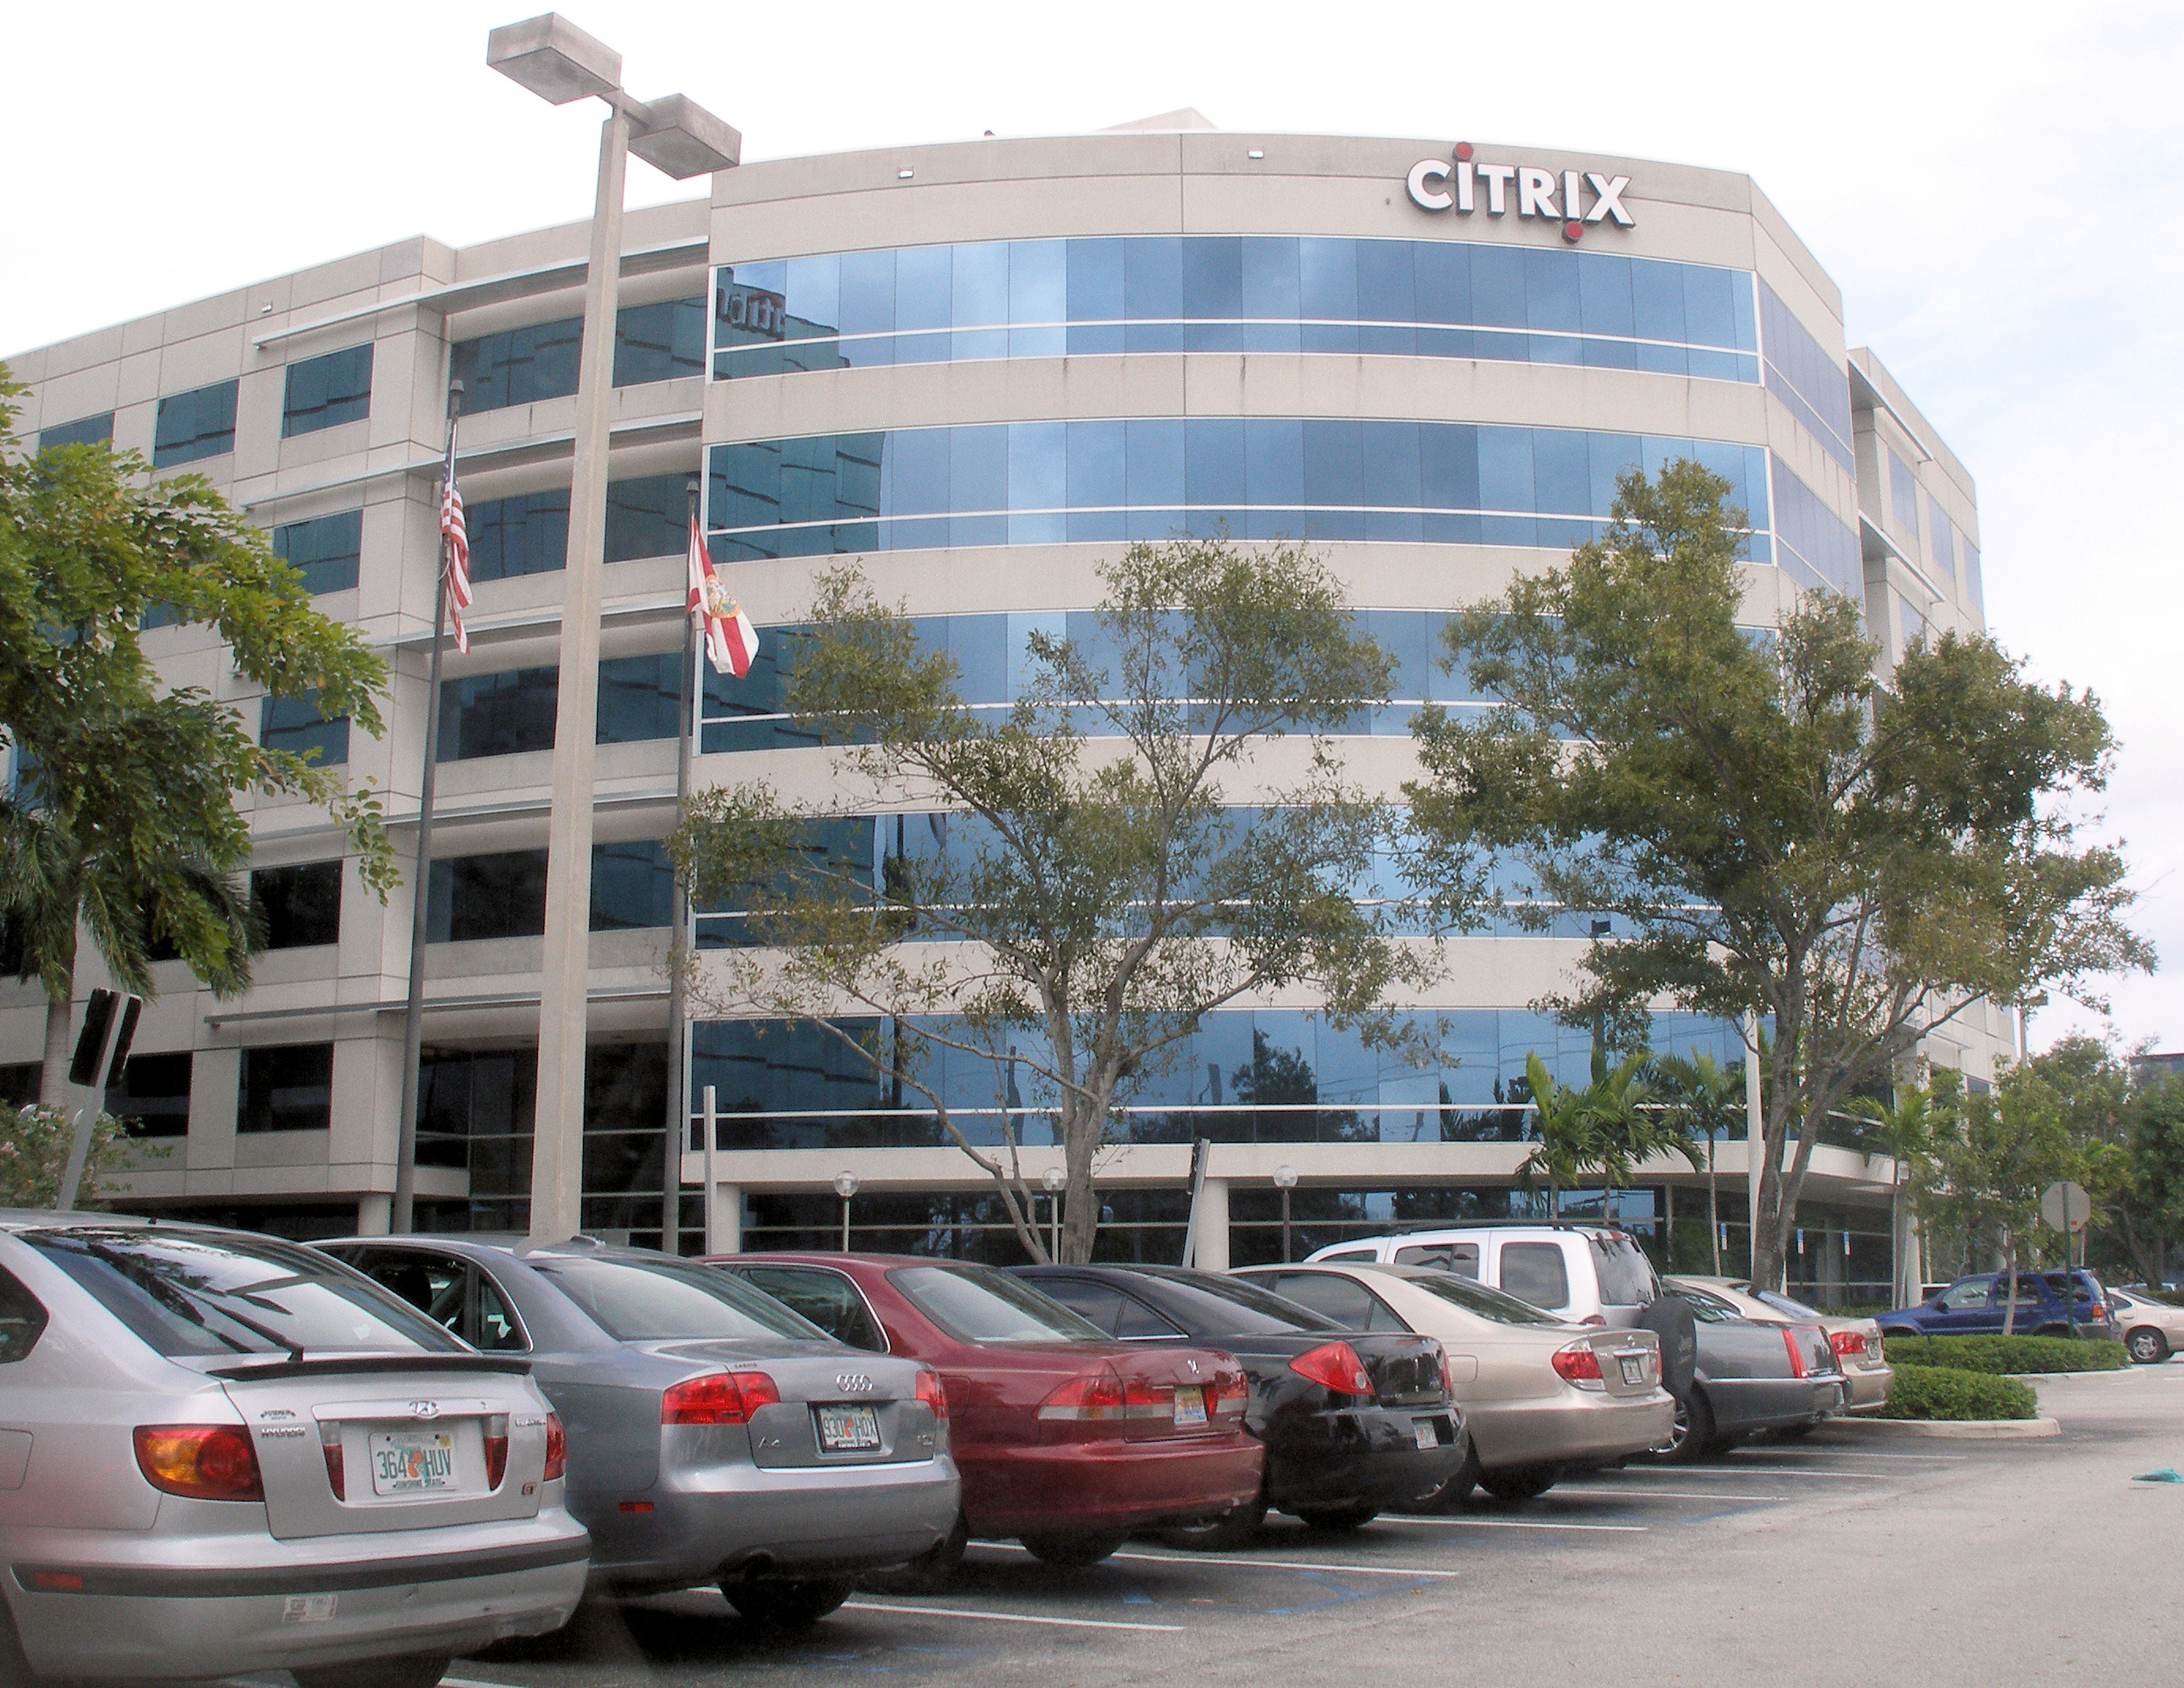 Citrix in last-ditch attempt to sell itself: sources